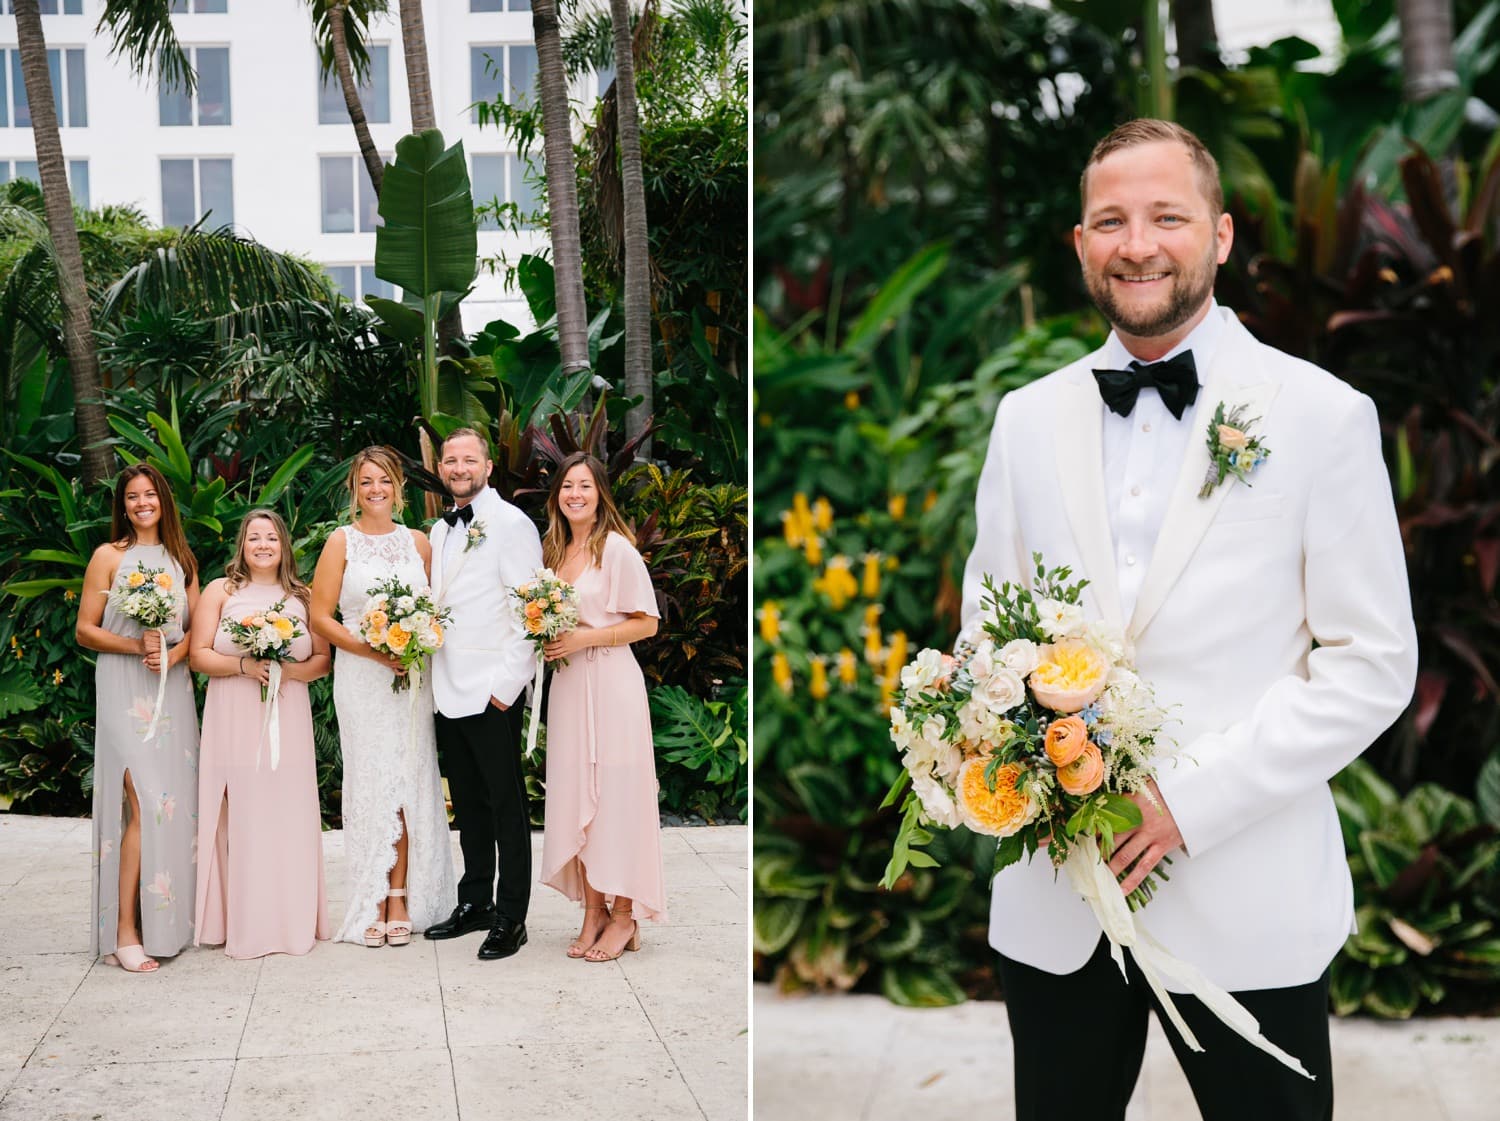 Tropical flower arrangements and beach dresses for a wedding at The Palms Hotel in Miami